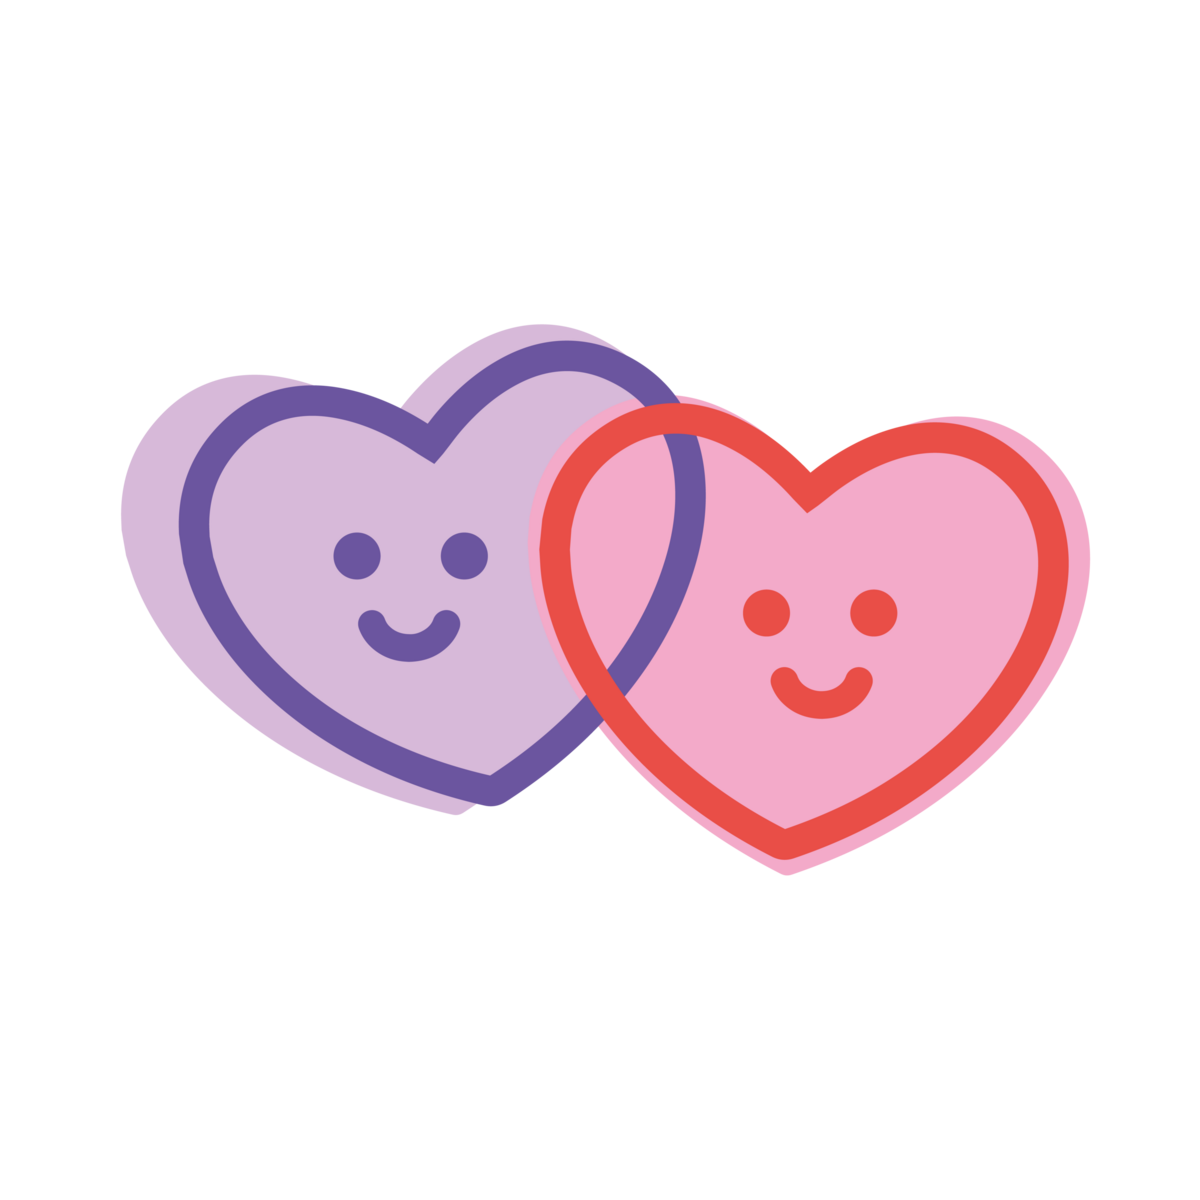 Two smiling love hearts logo